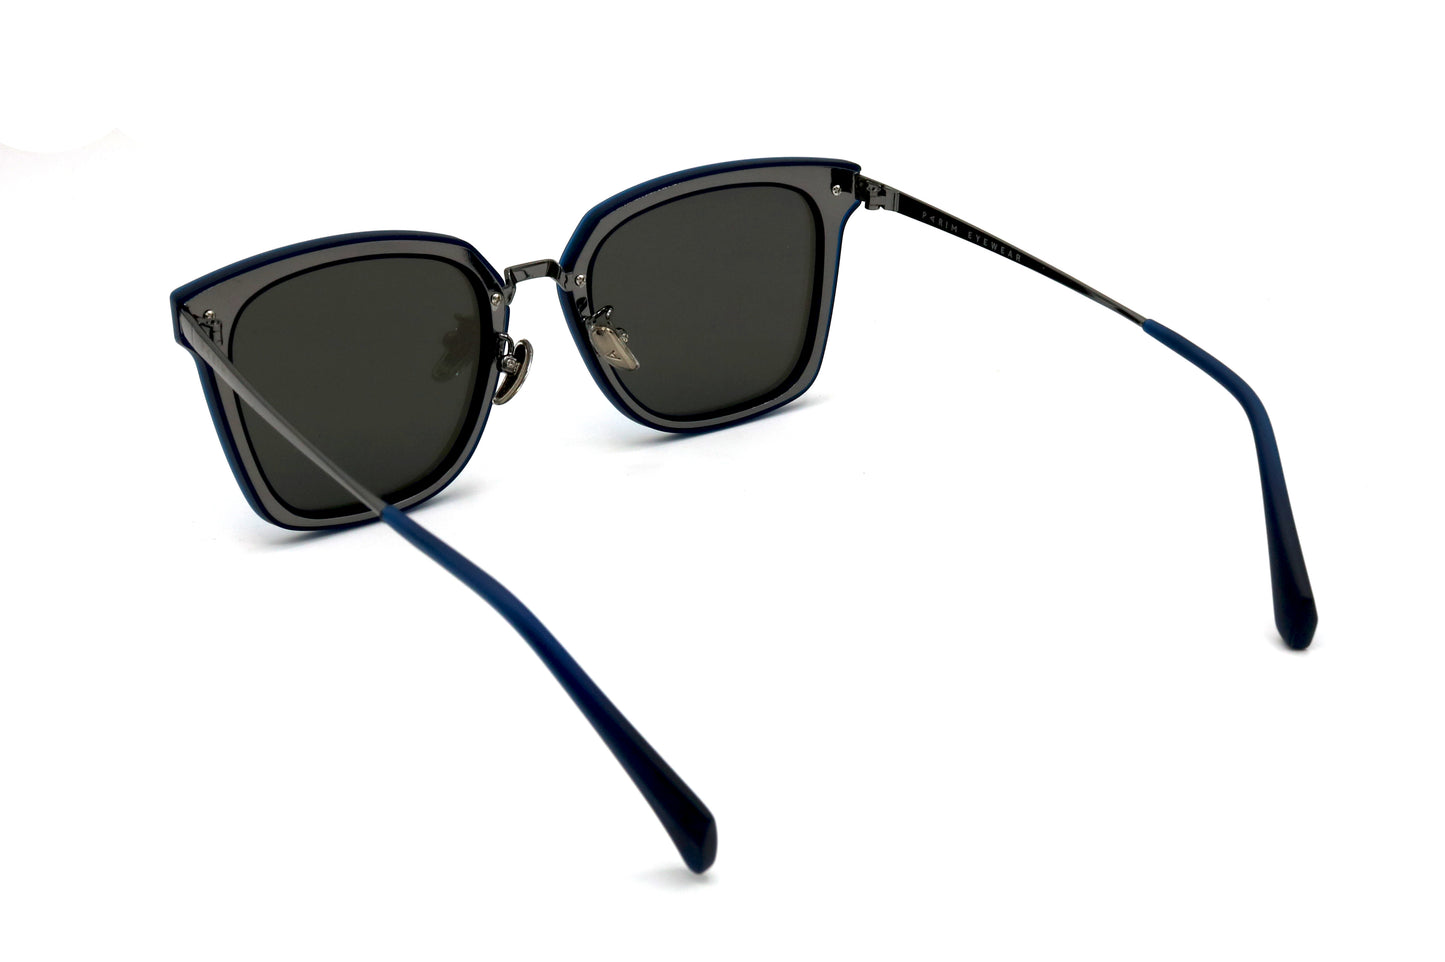 NS Deluxe - 73407 - Blue - Sunglasses